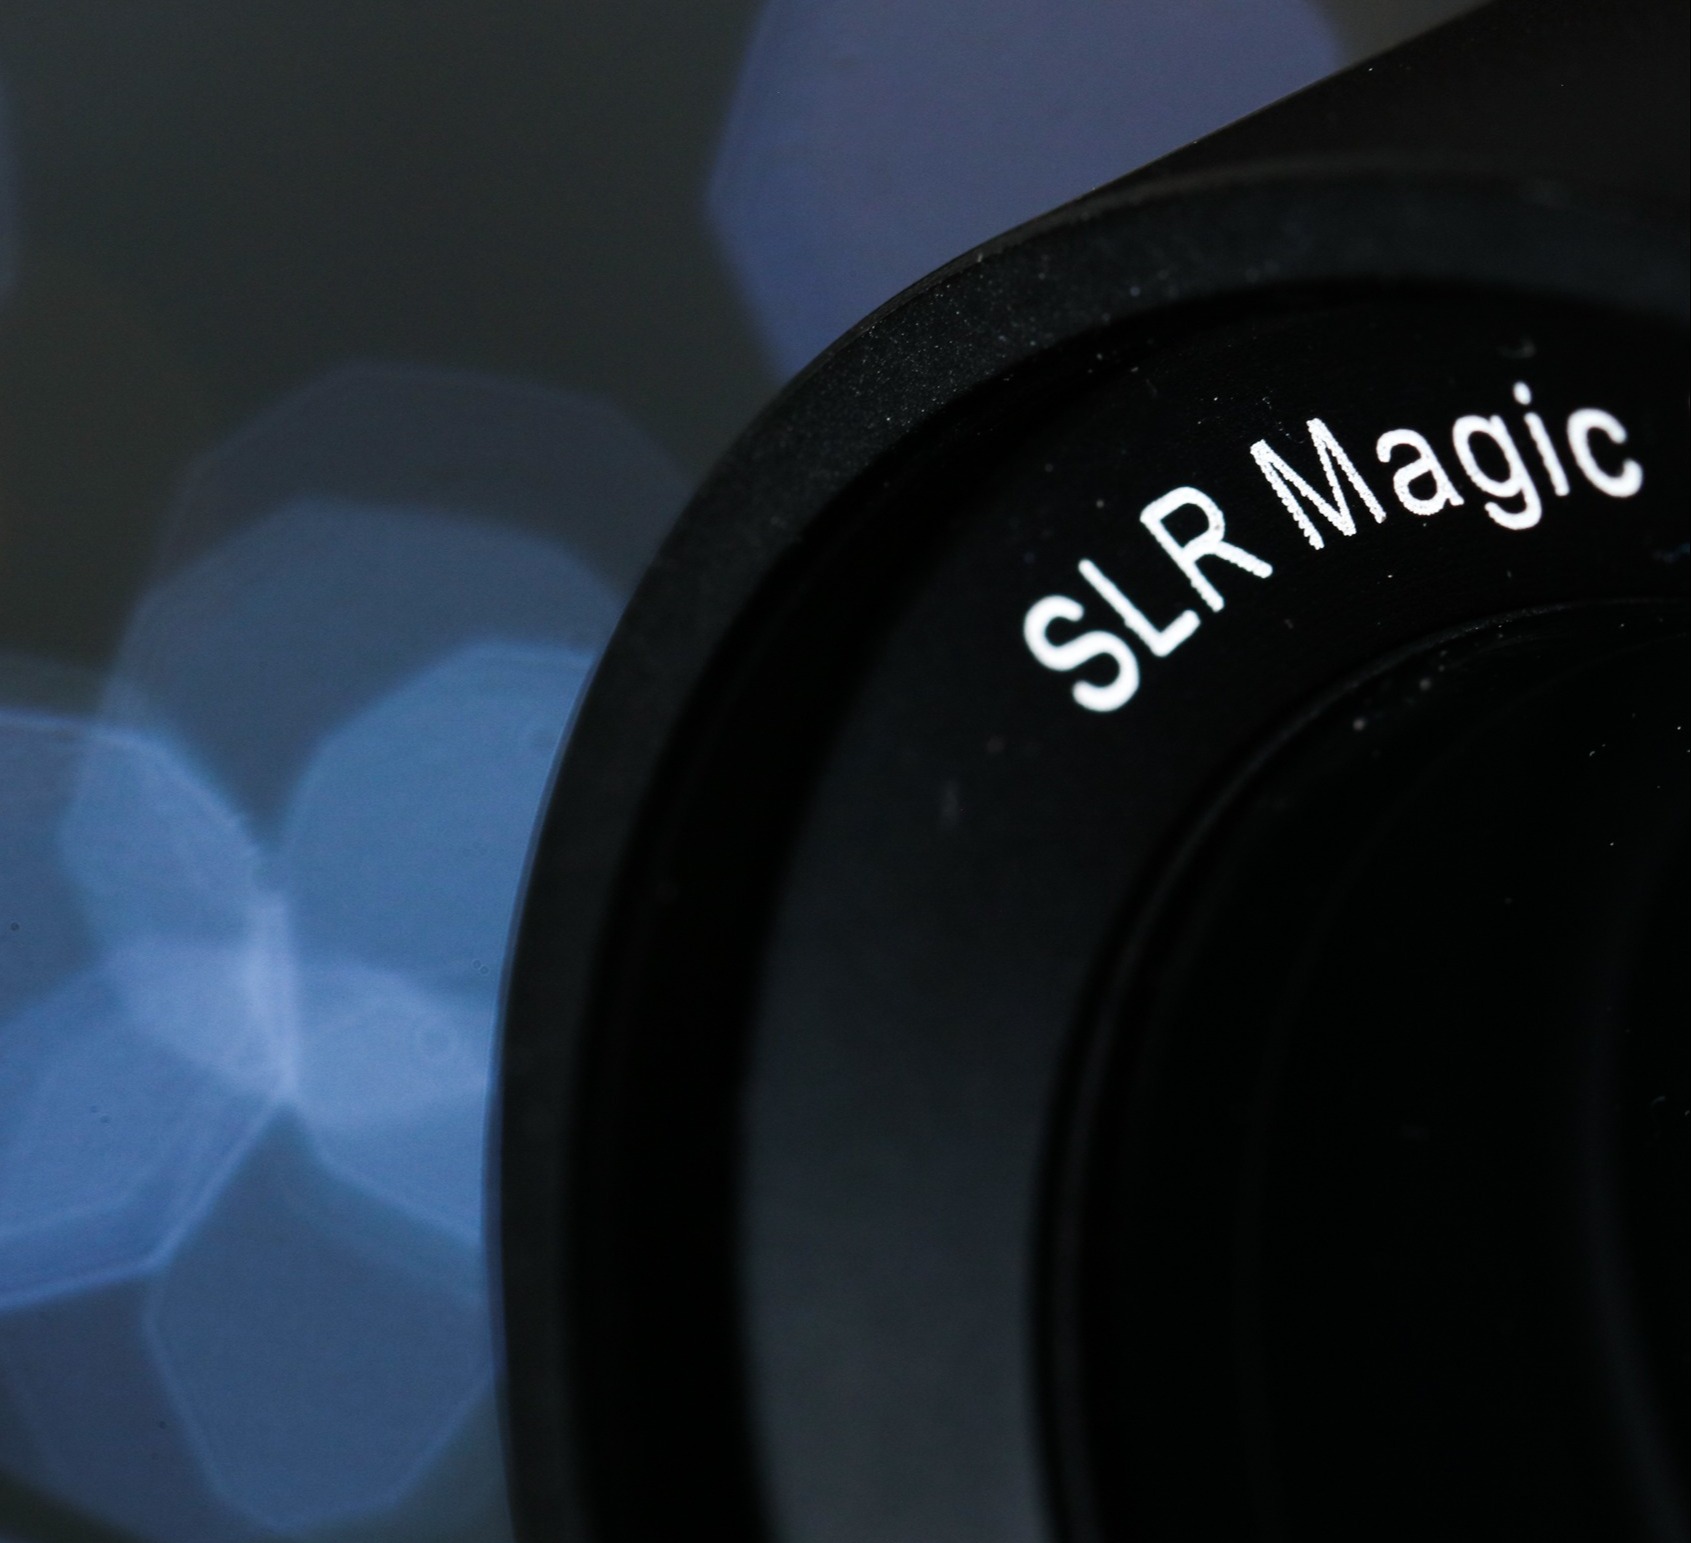 Used SLR Magic MicroPrime Cine 35mm T1.3 - Sony FE Fit